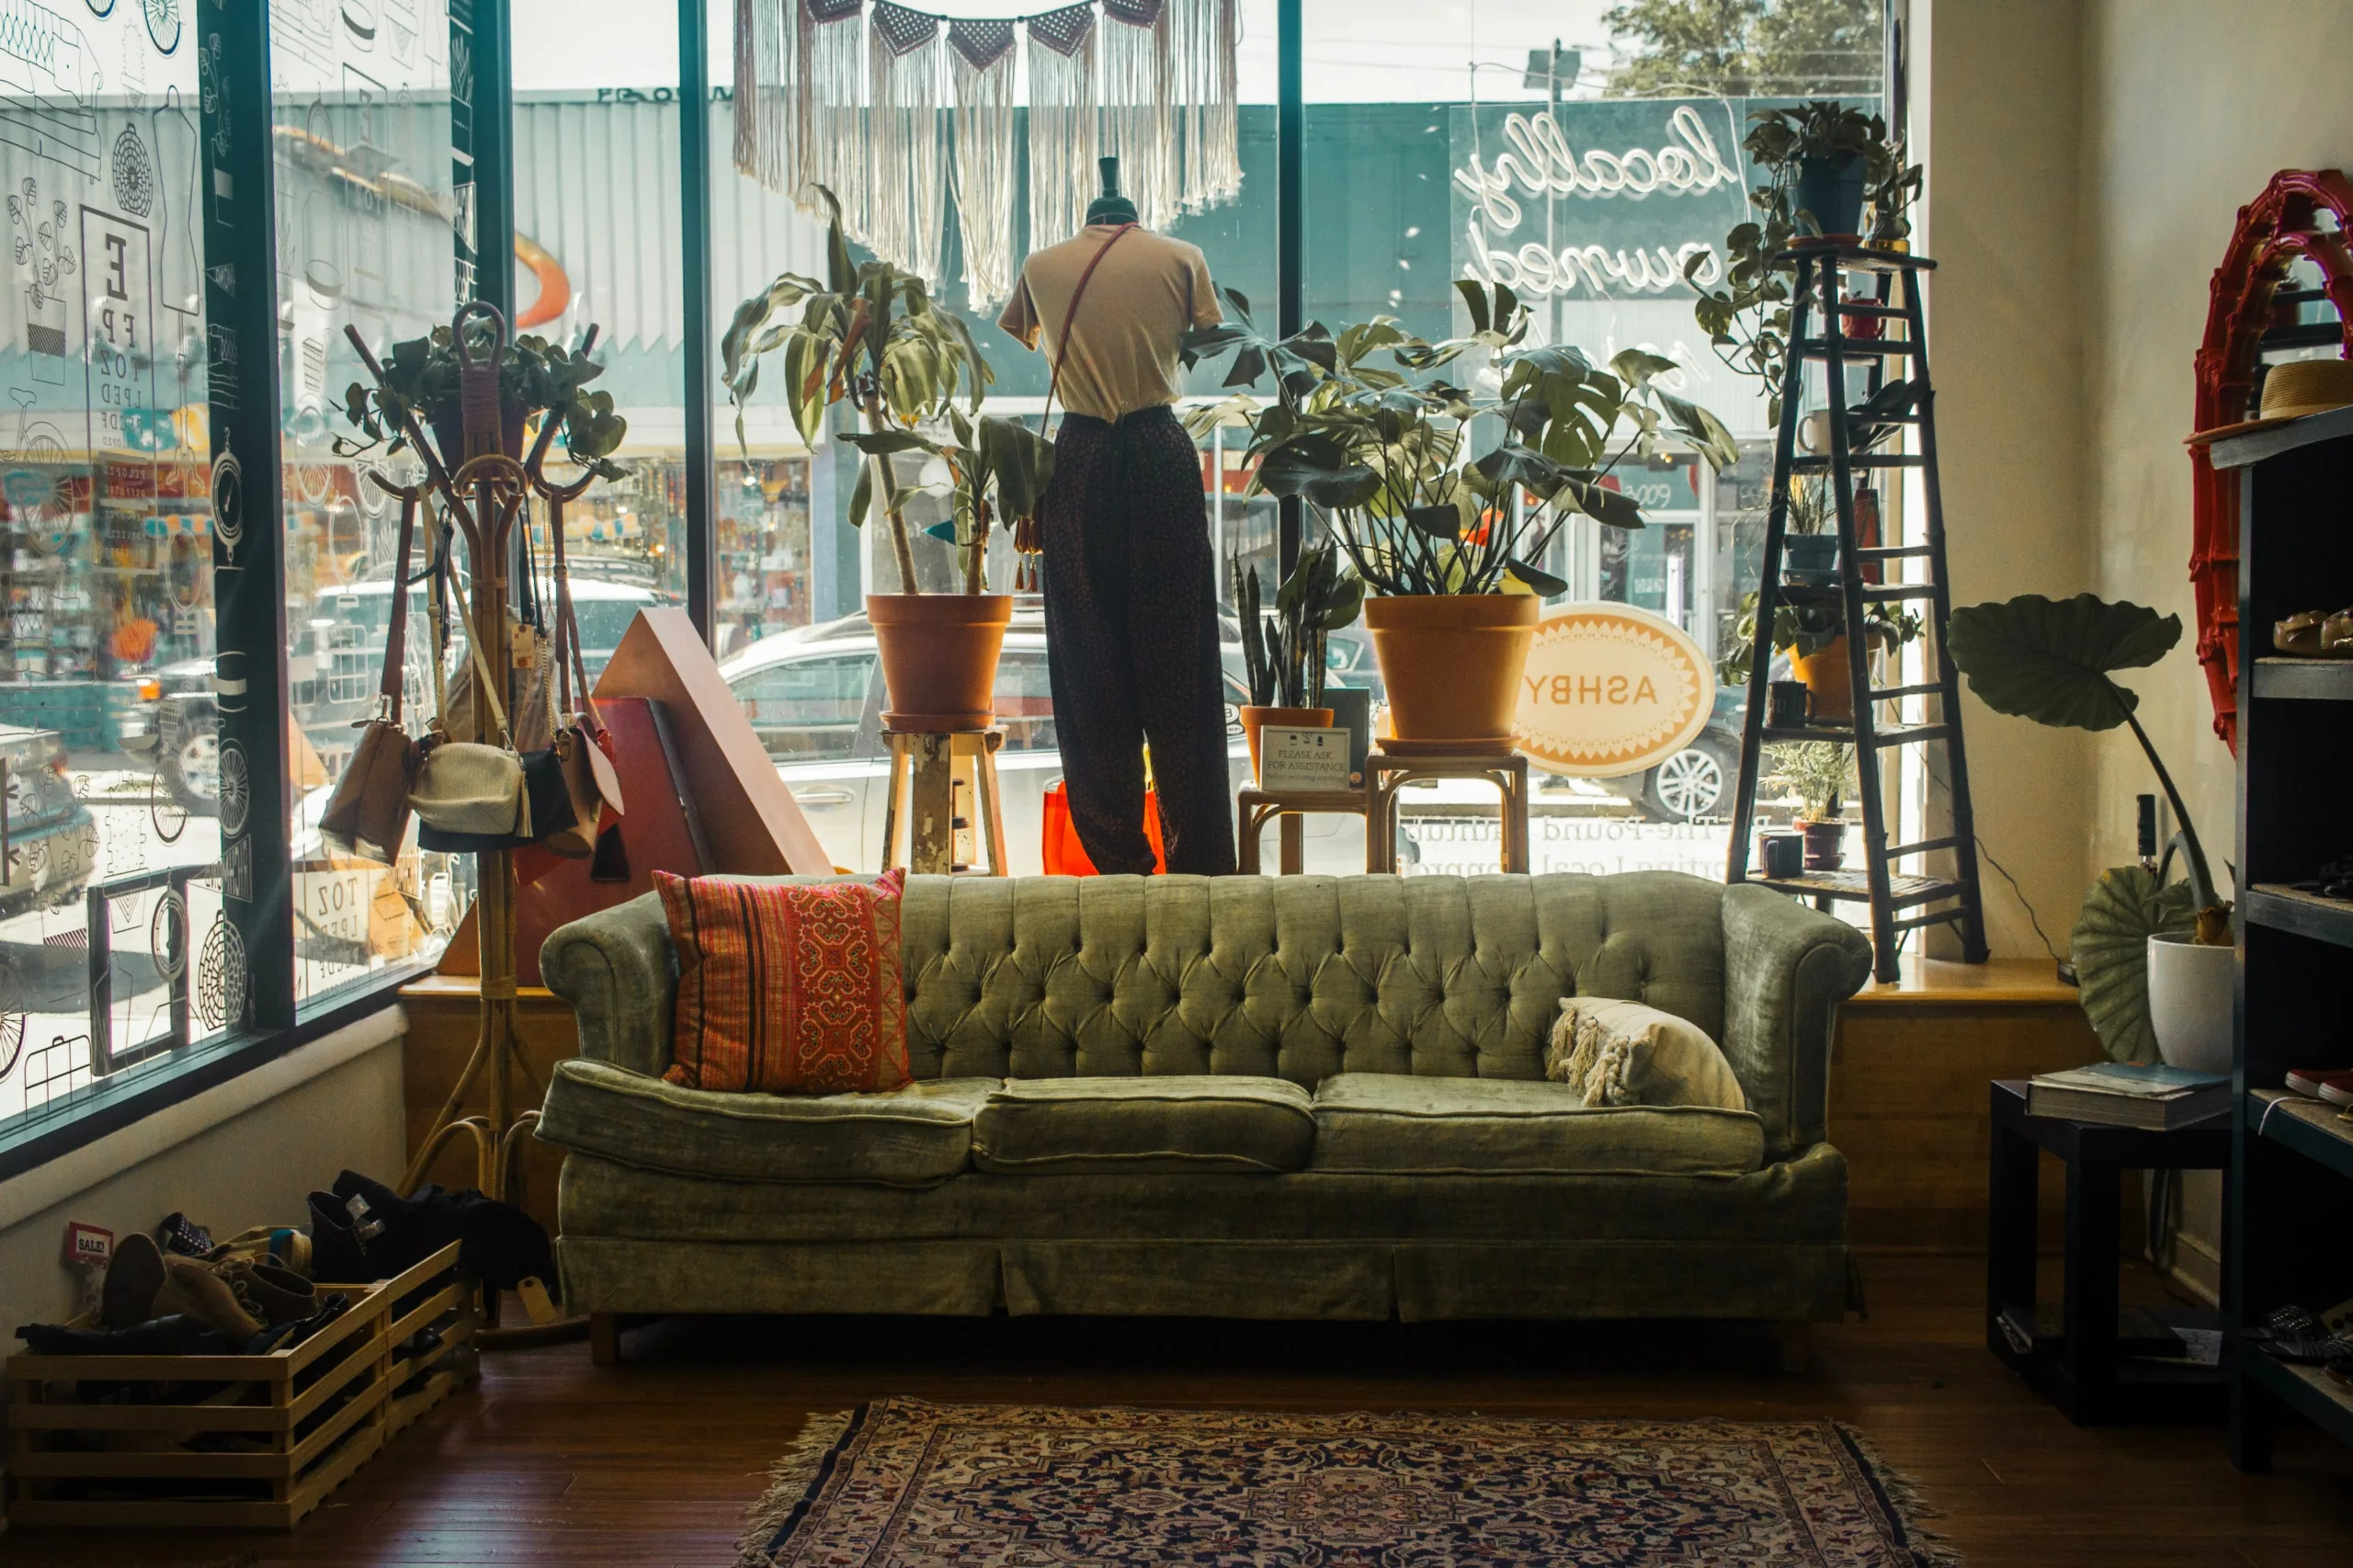 Sustainable Splurges: 10 Awesome Thrift Stores in Portland You Can’t Miss